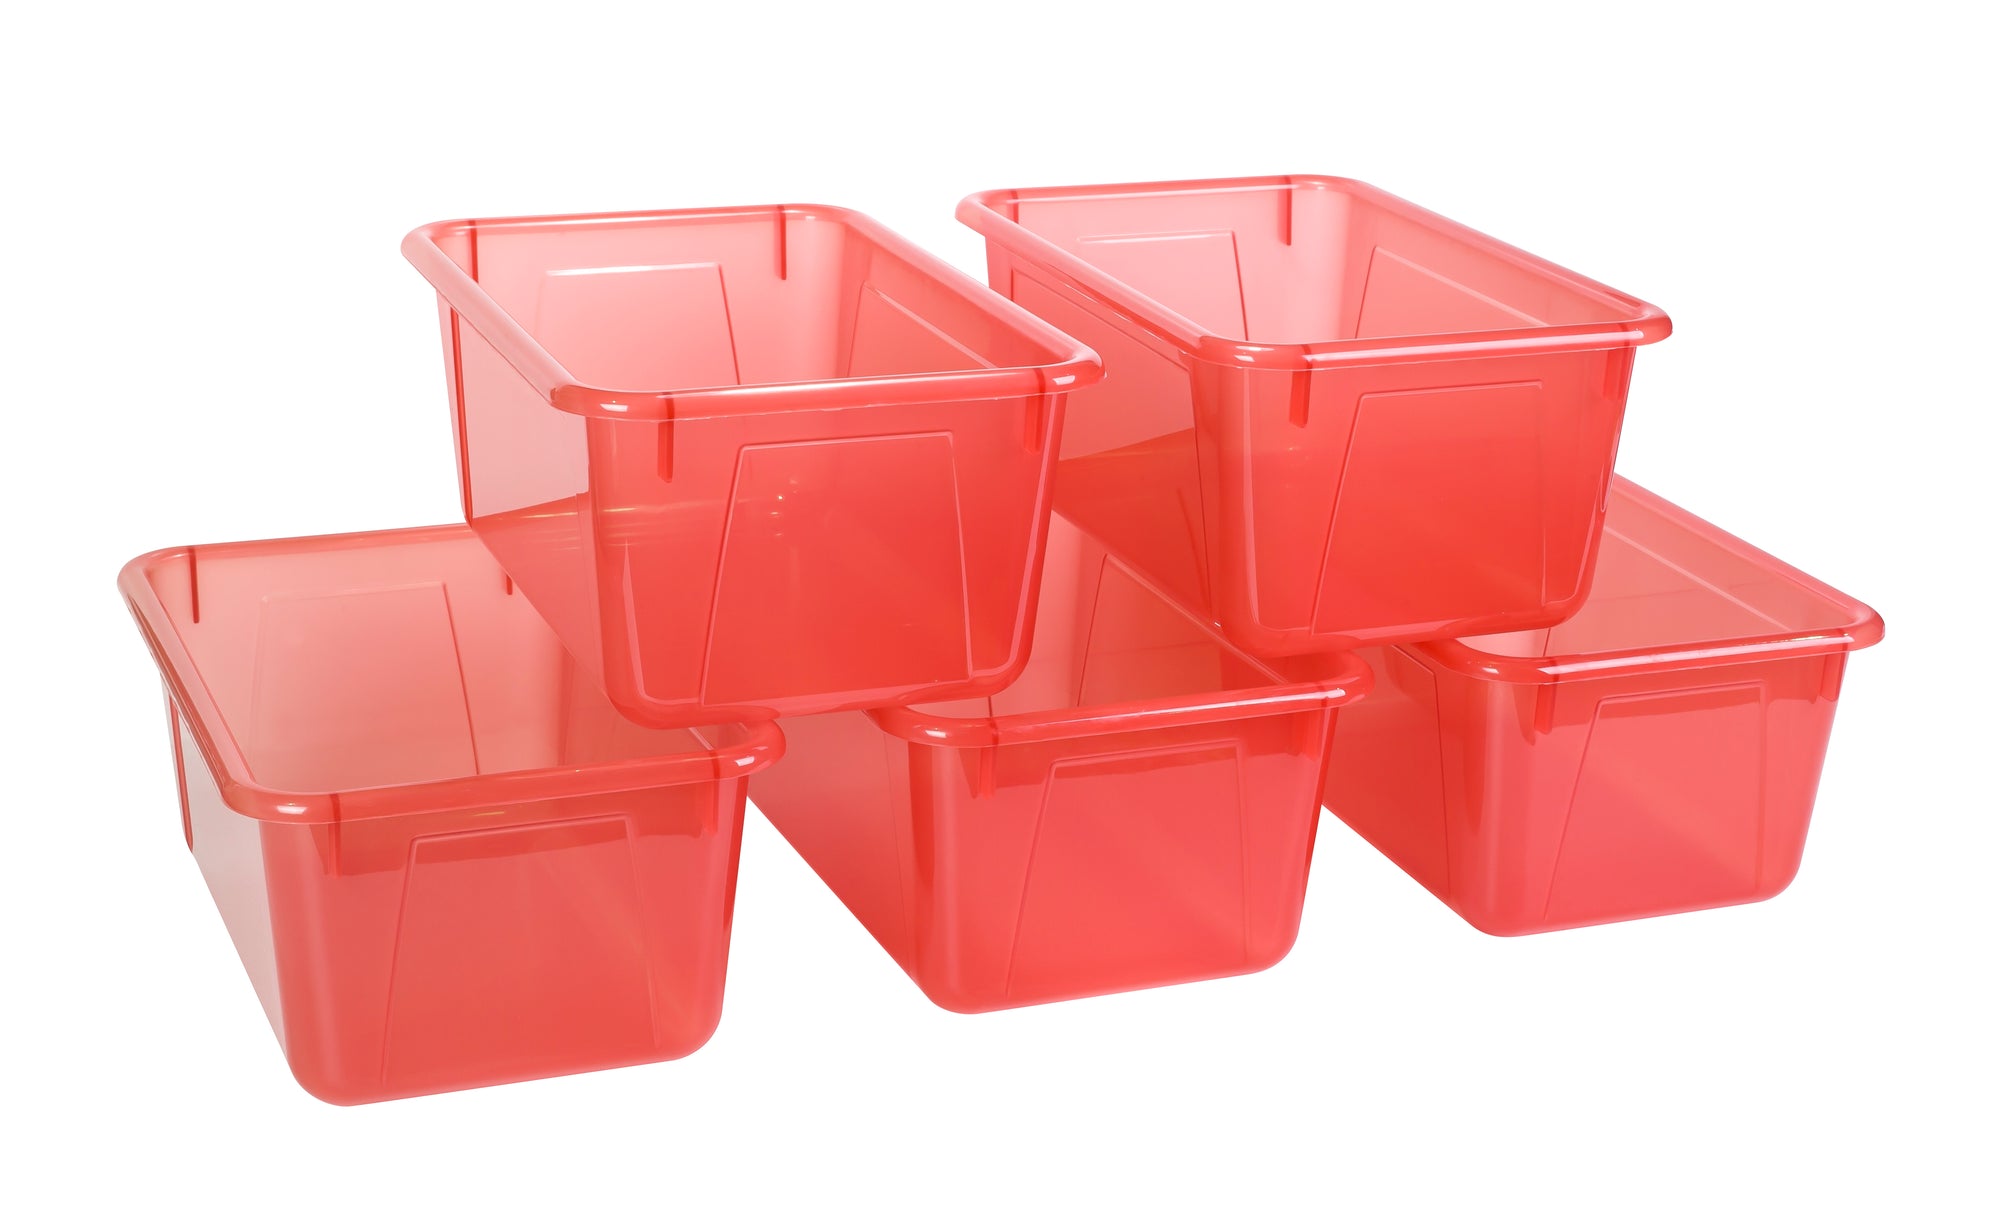 Storex Small Cubby Bin, Candy Red, 5-Pack